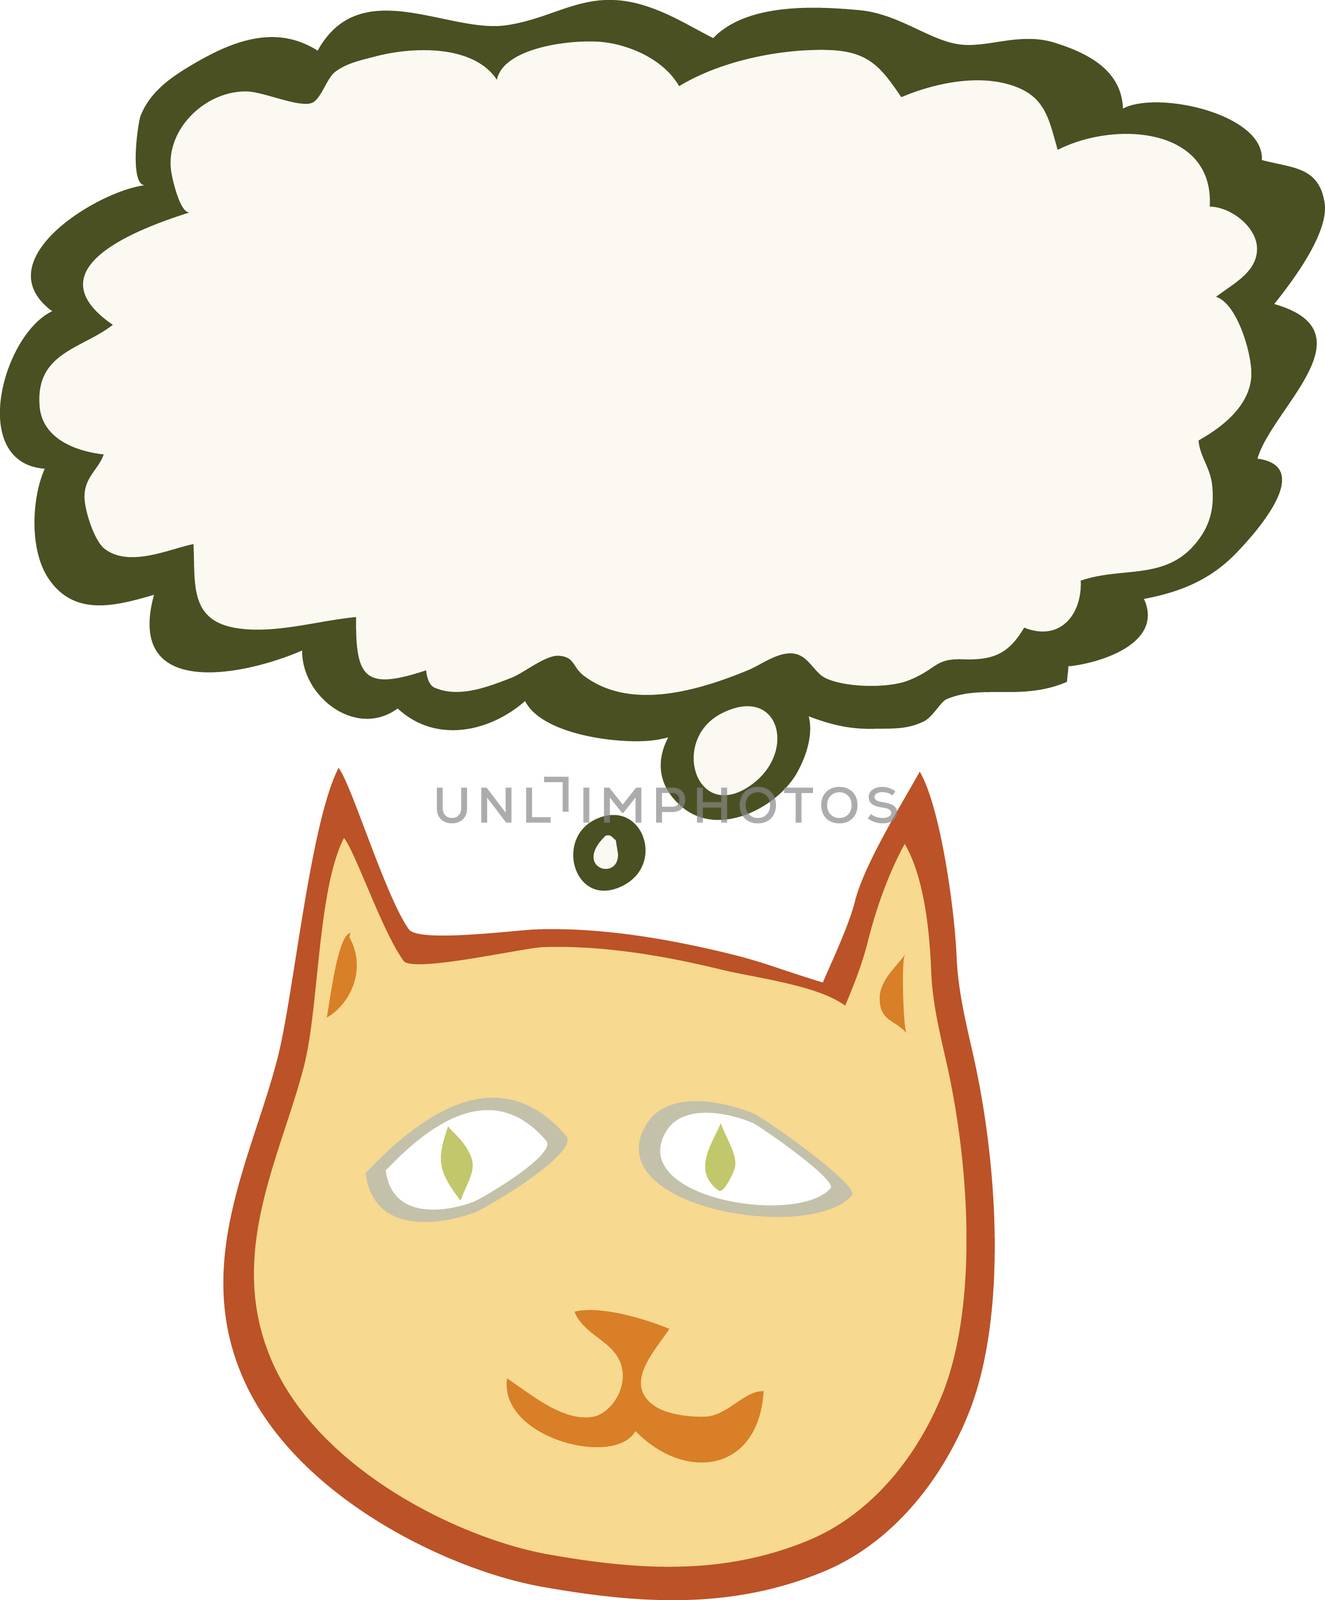 Illustration of simple grinning cat face with thought bubble over white background